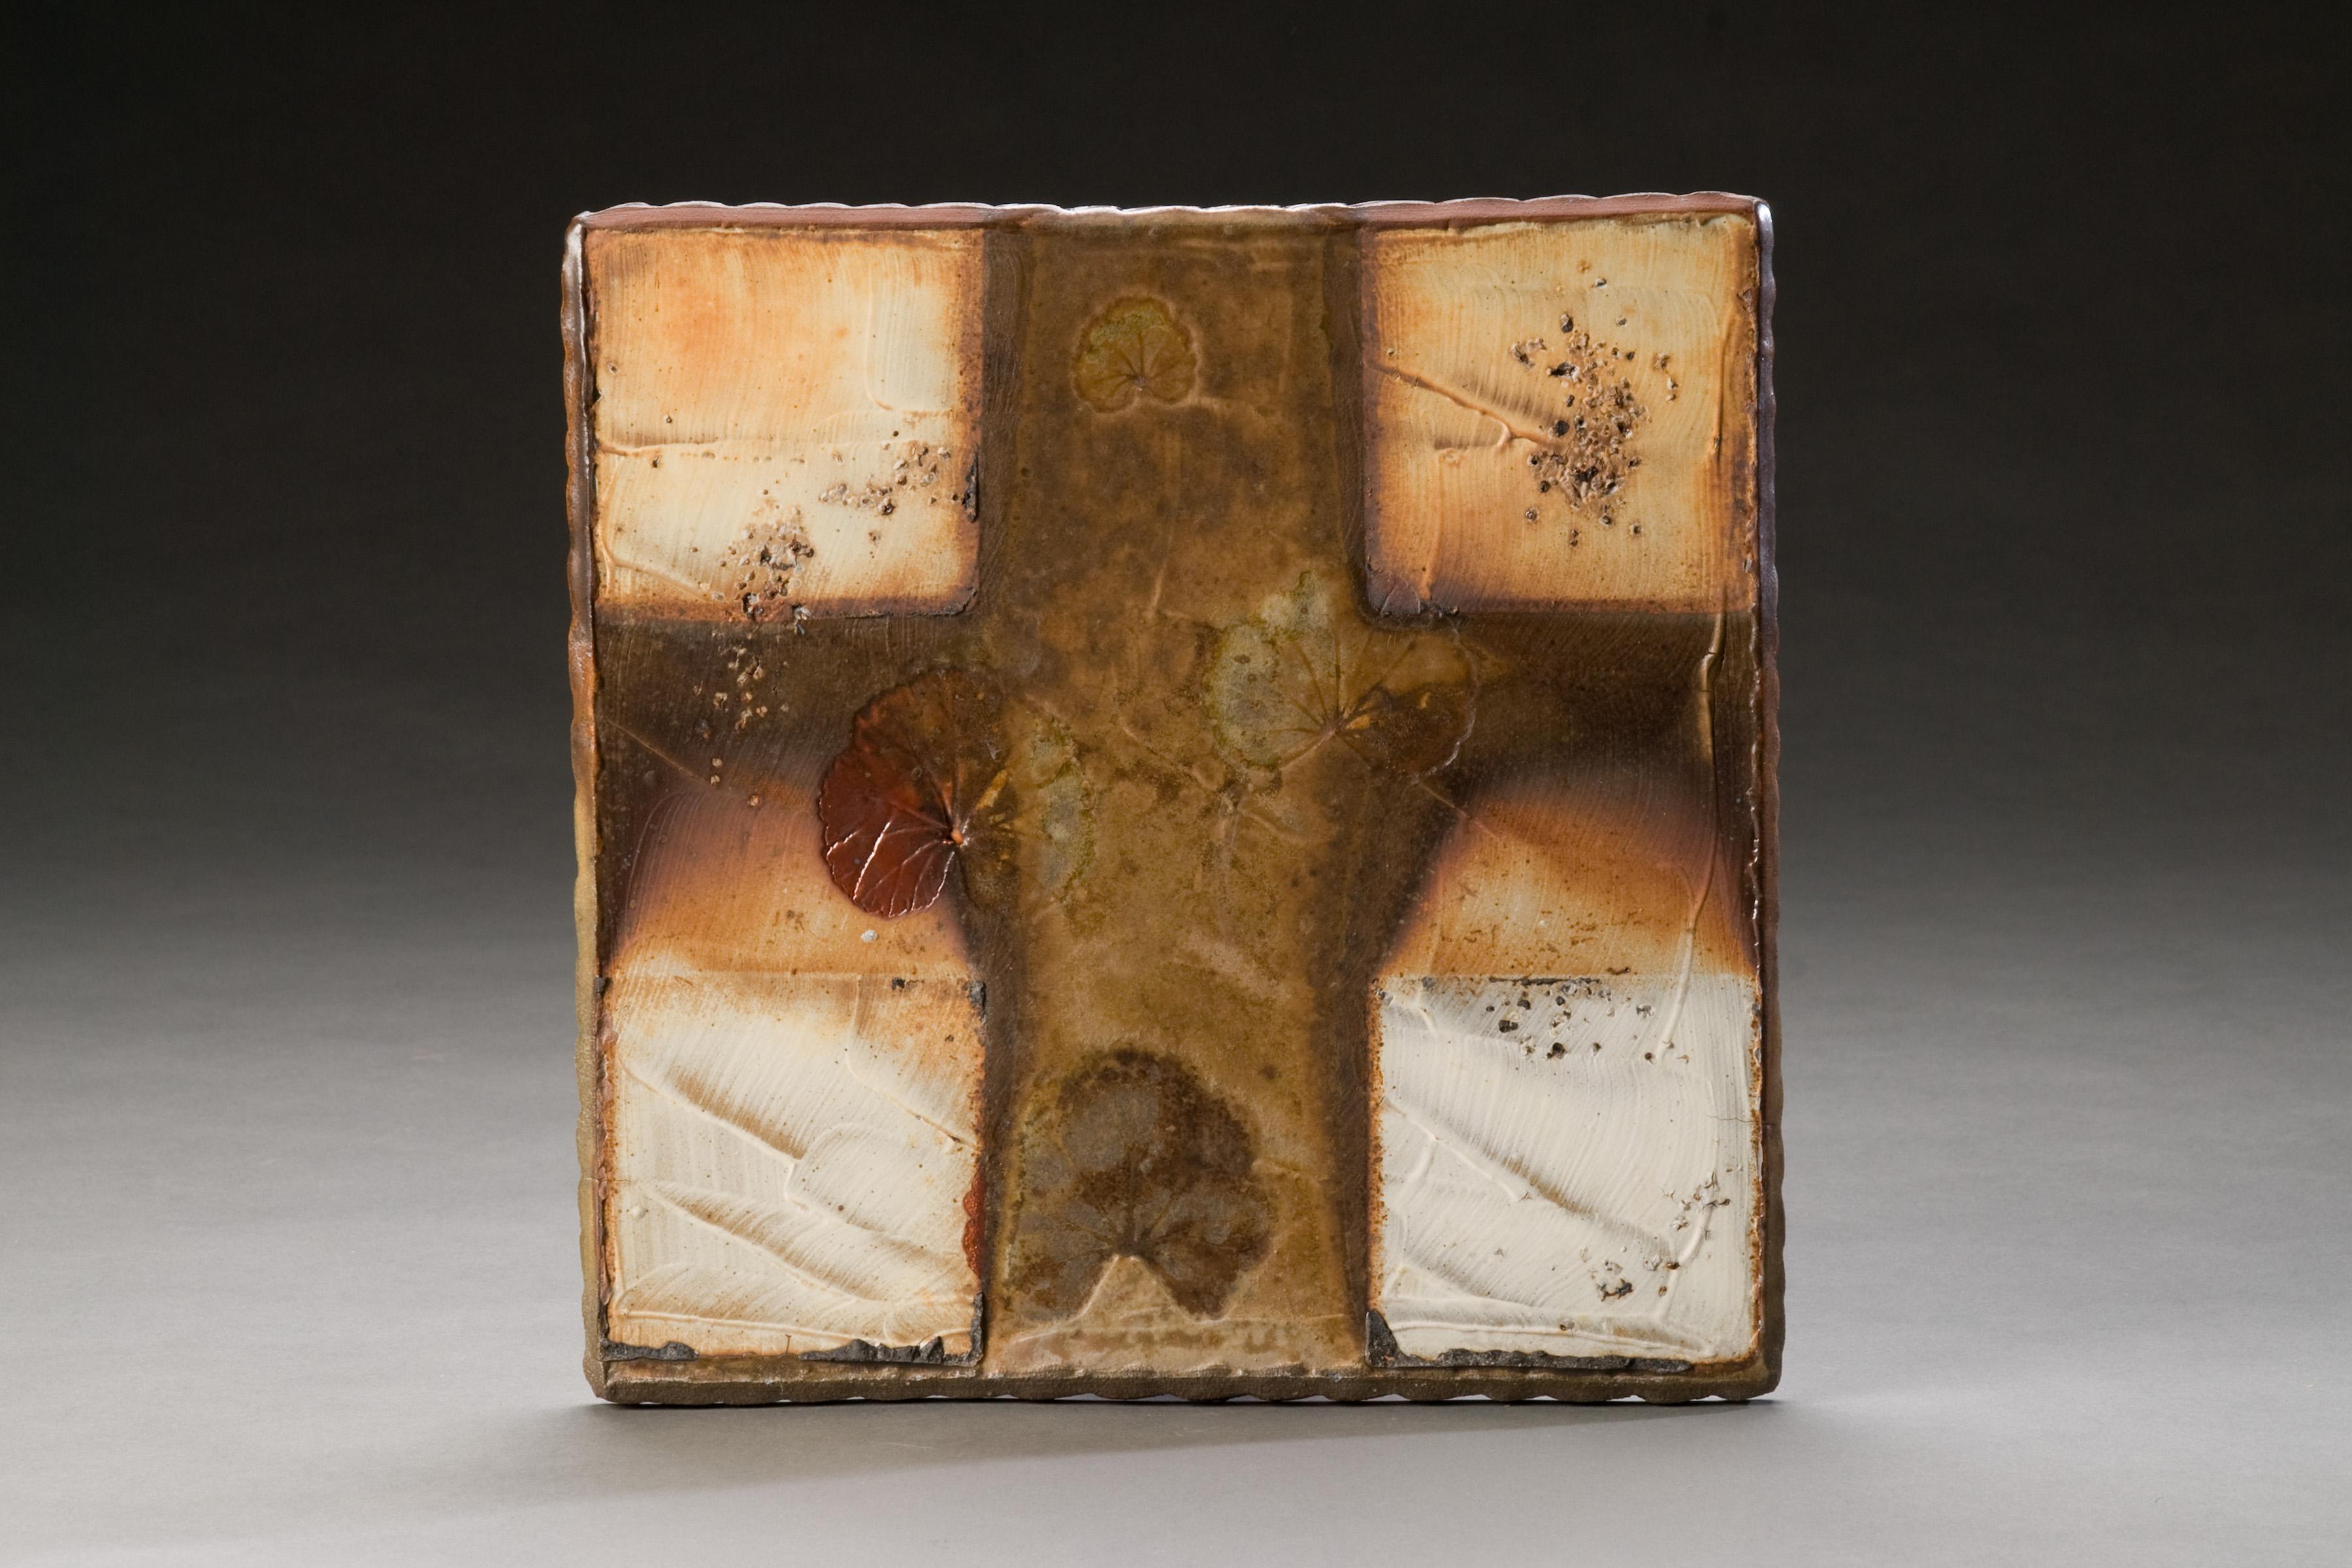 Tony Moore Abstract Sculpture - Wood Fired Ceramic Painting: 'Fire Painting 3.2.10'